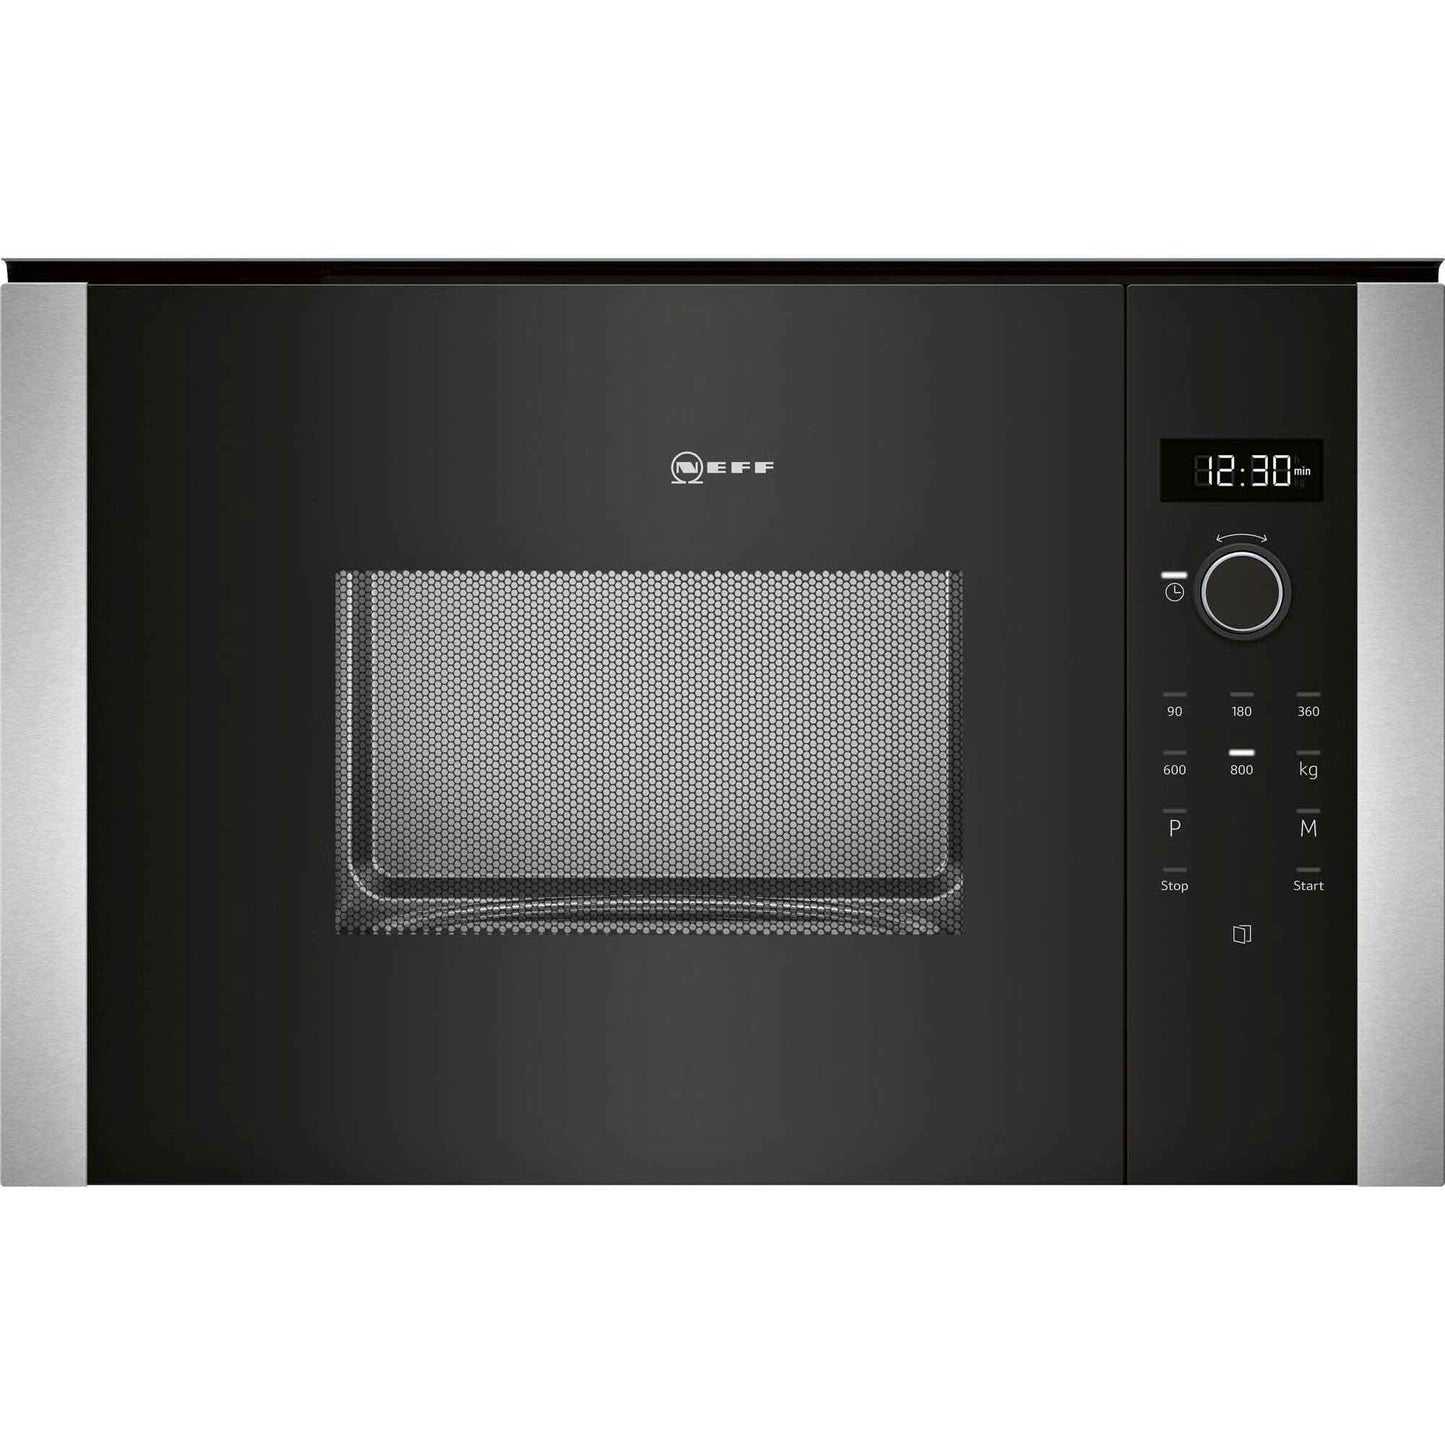 NEFF HLAWD23N0 N 50 Built-in microwave oven